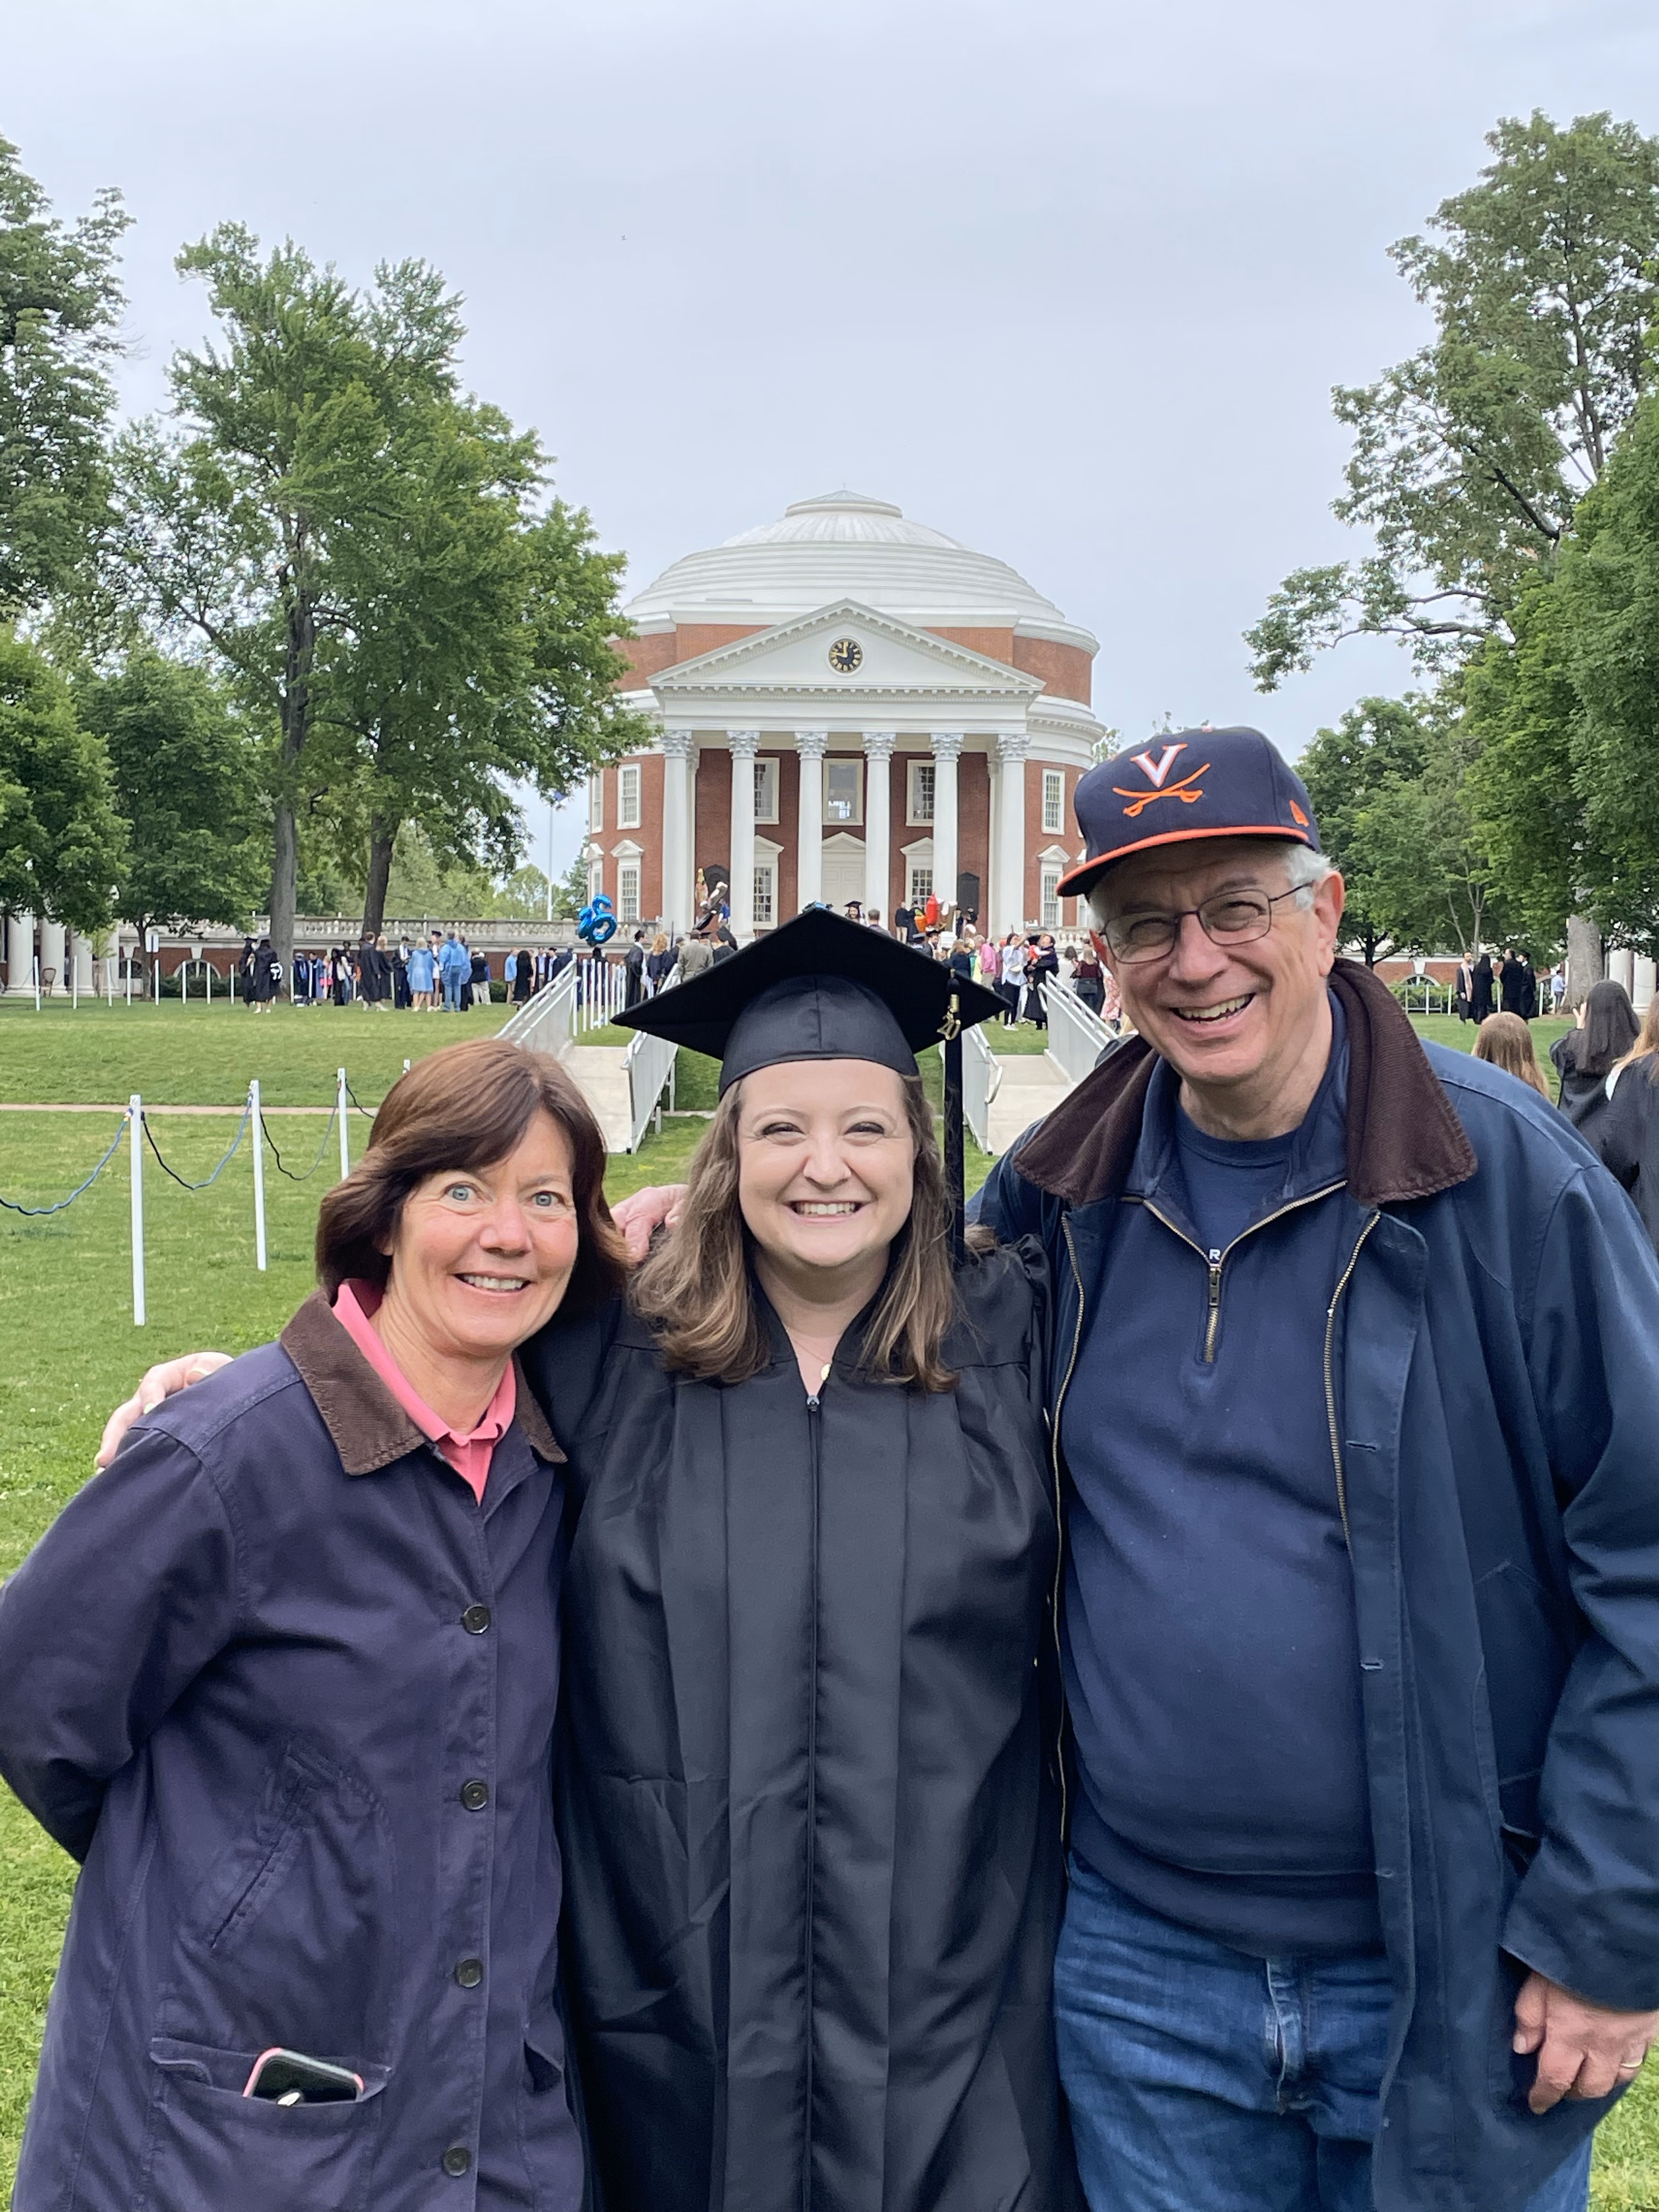 My parents and I when I had my graduation at the University of Virginia.